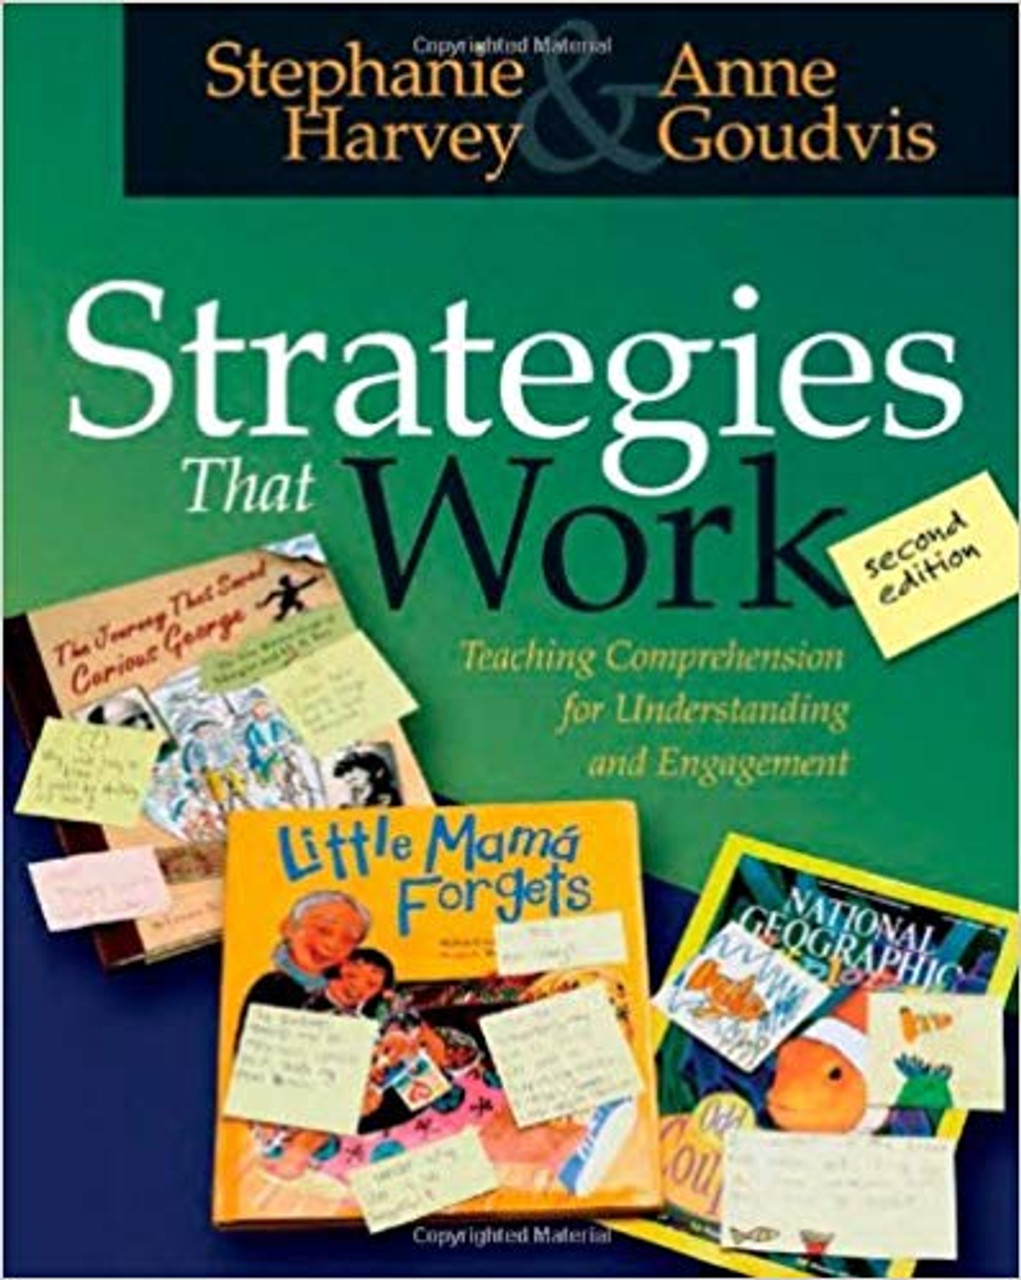 Strategies That Work: Teaching Comprehension for Understanding and Engagement by Stephanie Harvey